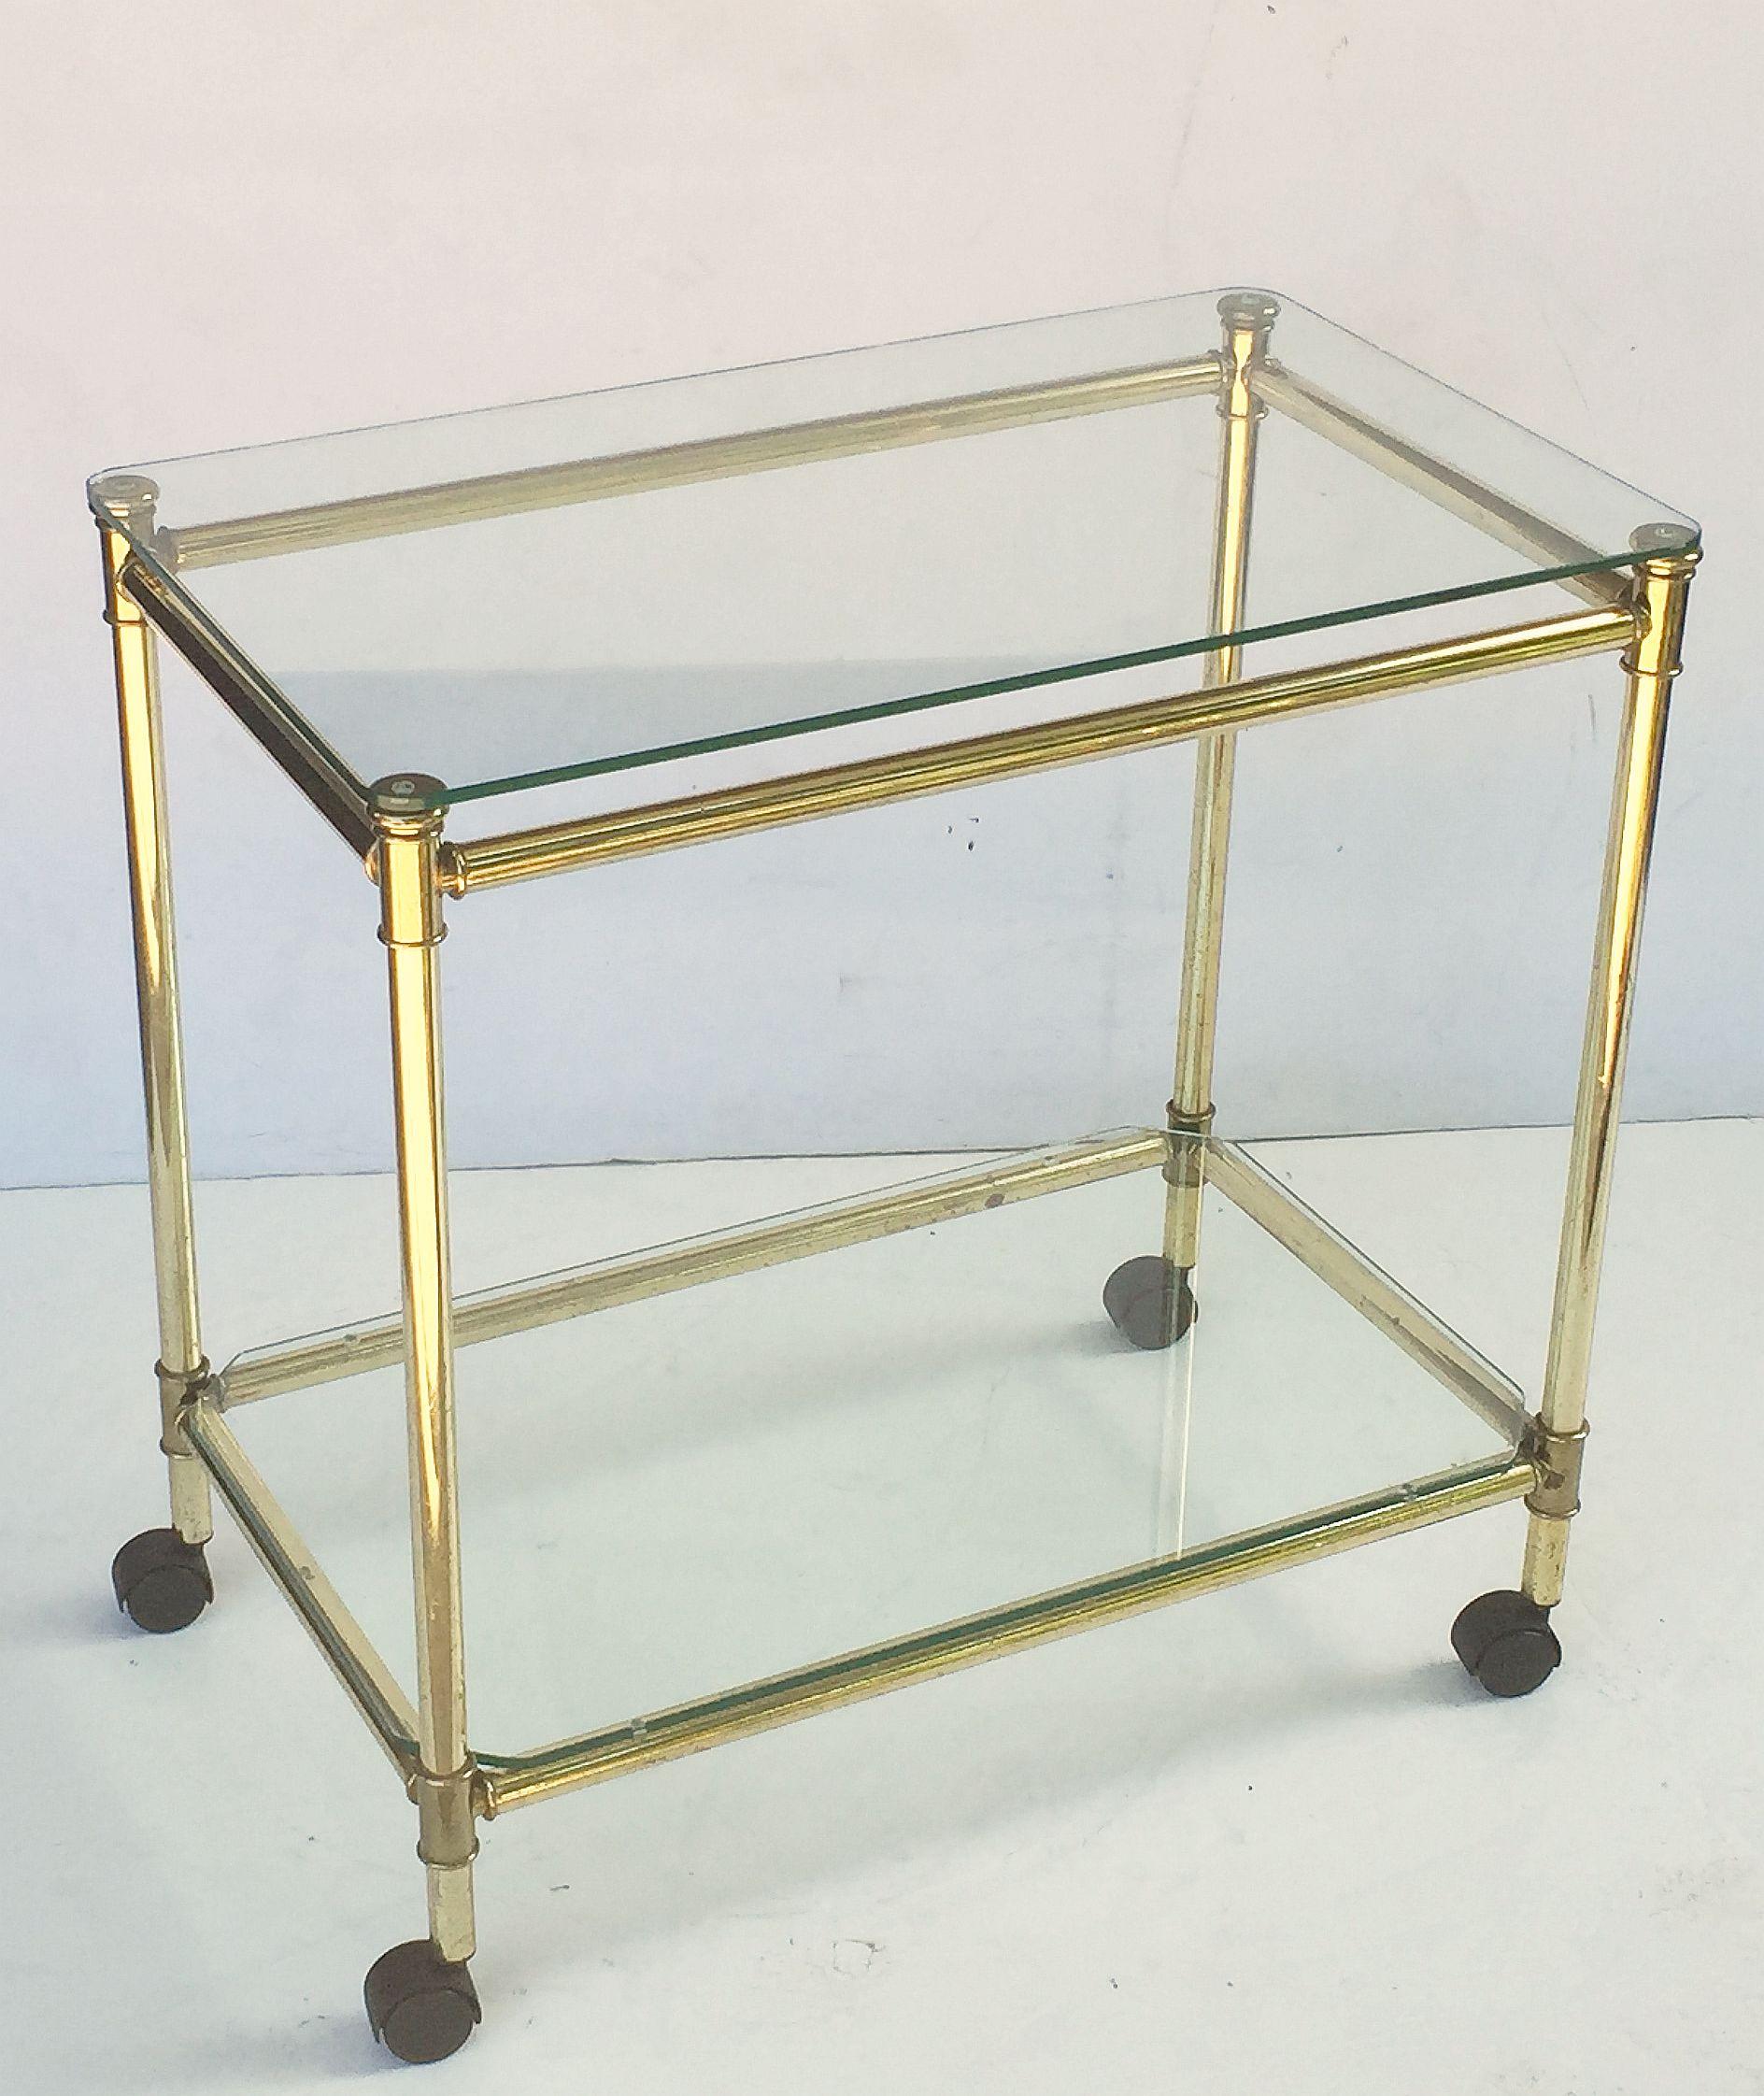 A handsome vintage French rectangular bar cart table or serving trolley in brass, featuring two glass tiers on rolling caster wheels.

Perfect for use as a side or end table.